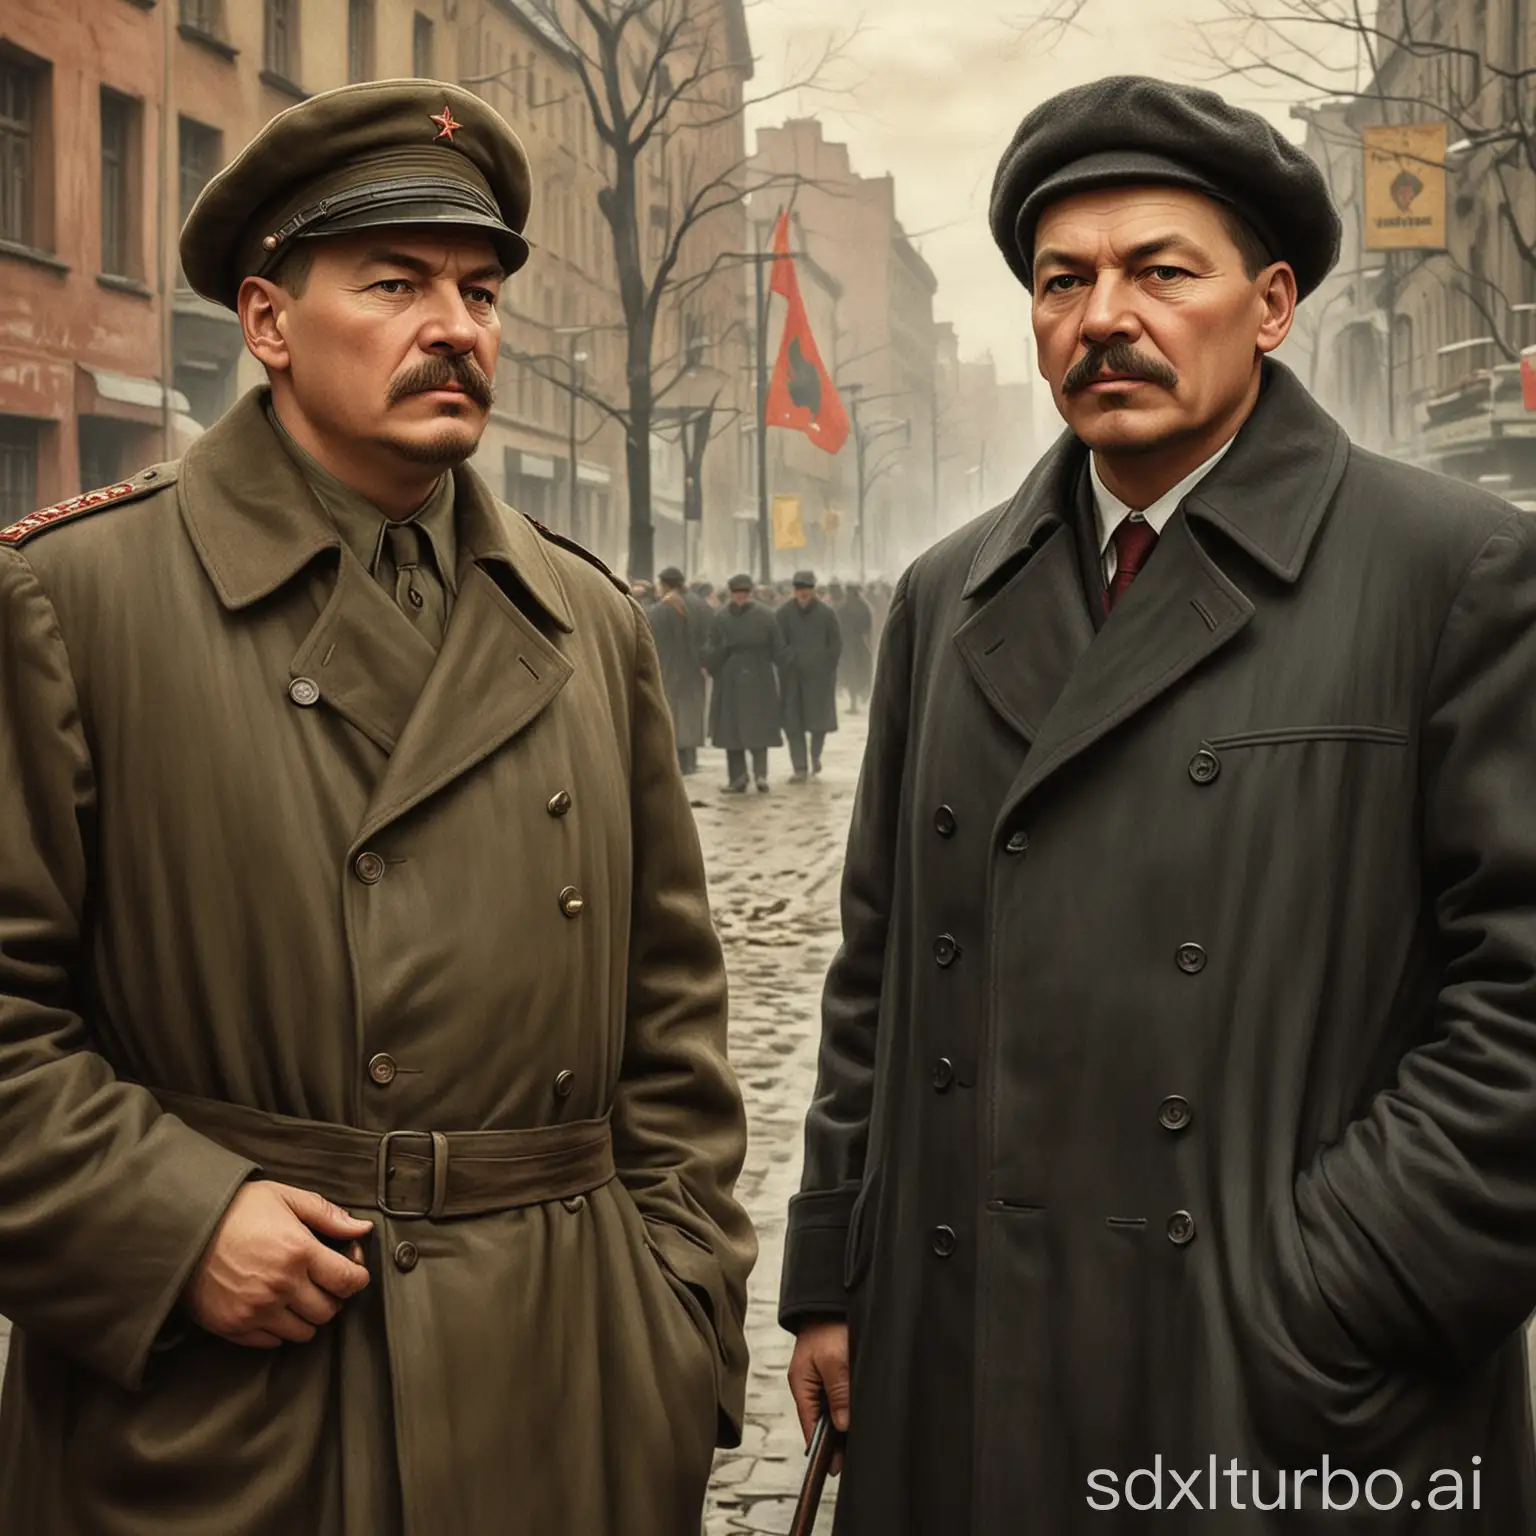 Vladimir Ilyich Lenin and Joseph Stalin, who are leading the people in resisting bourgeois oppression.